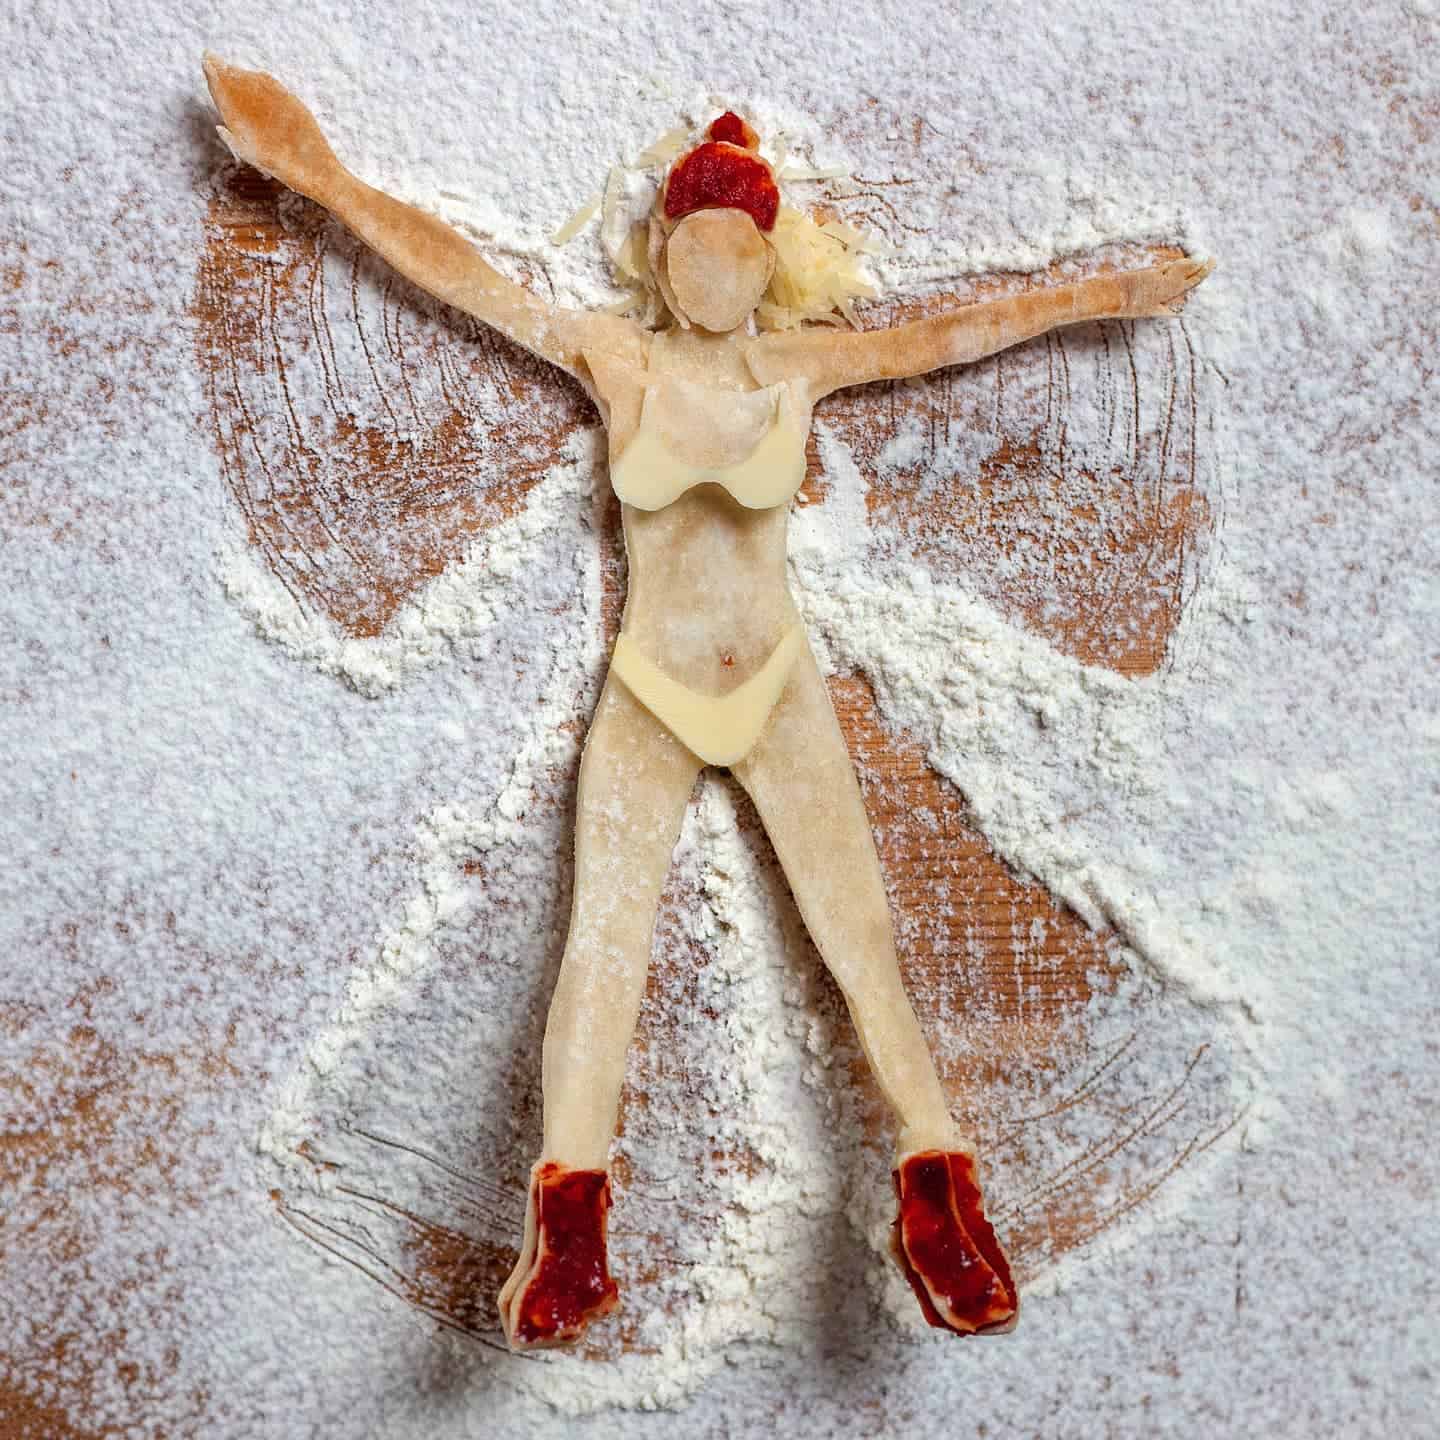 vegetable art of lady in the snow with bikini